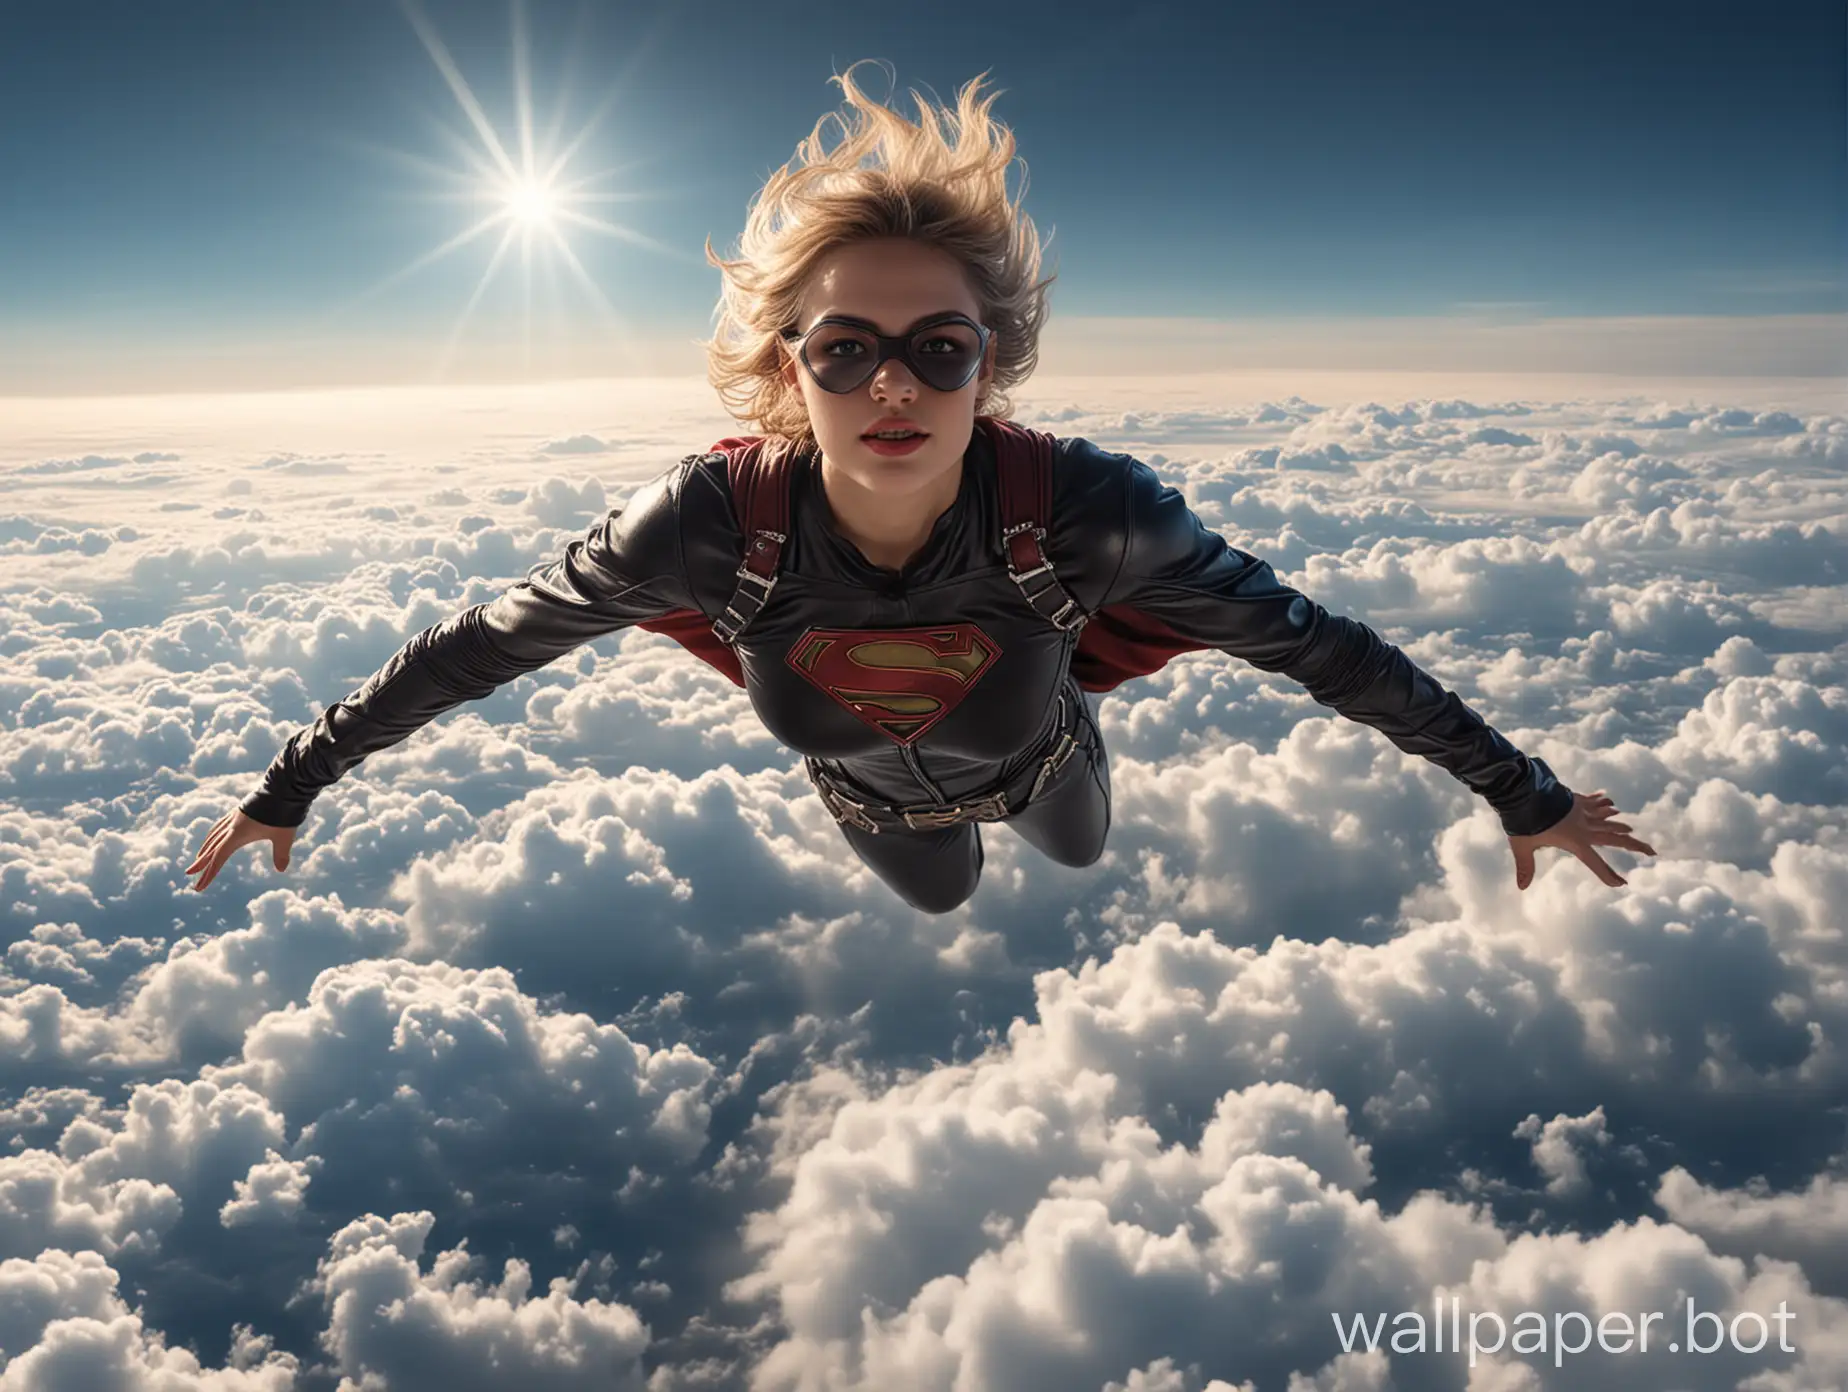 Super girl in leather bodysuit flying in the sky above the clouds.